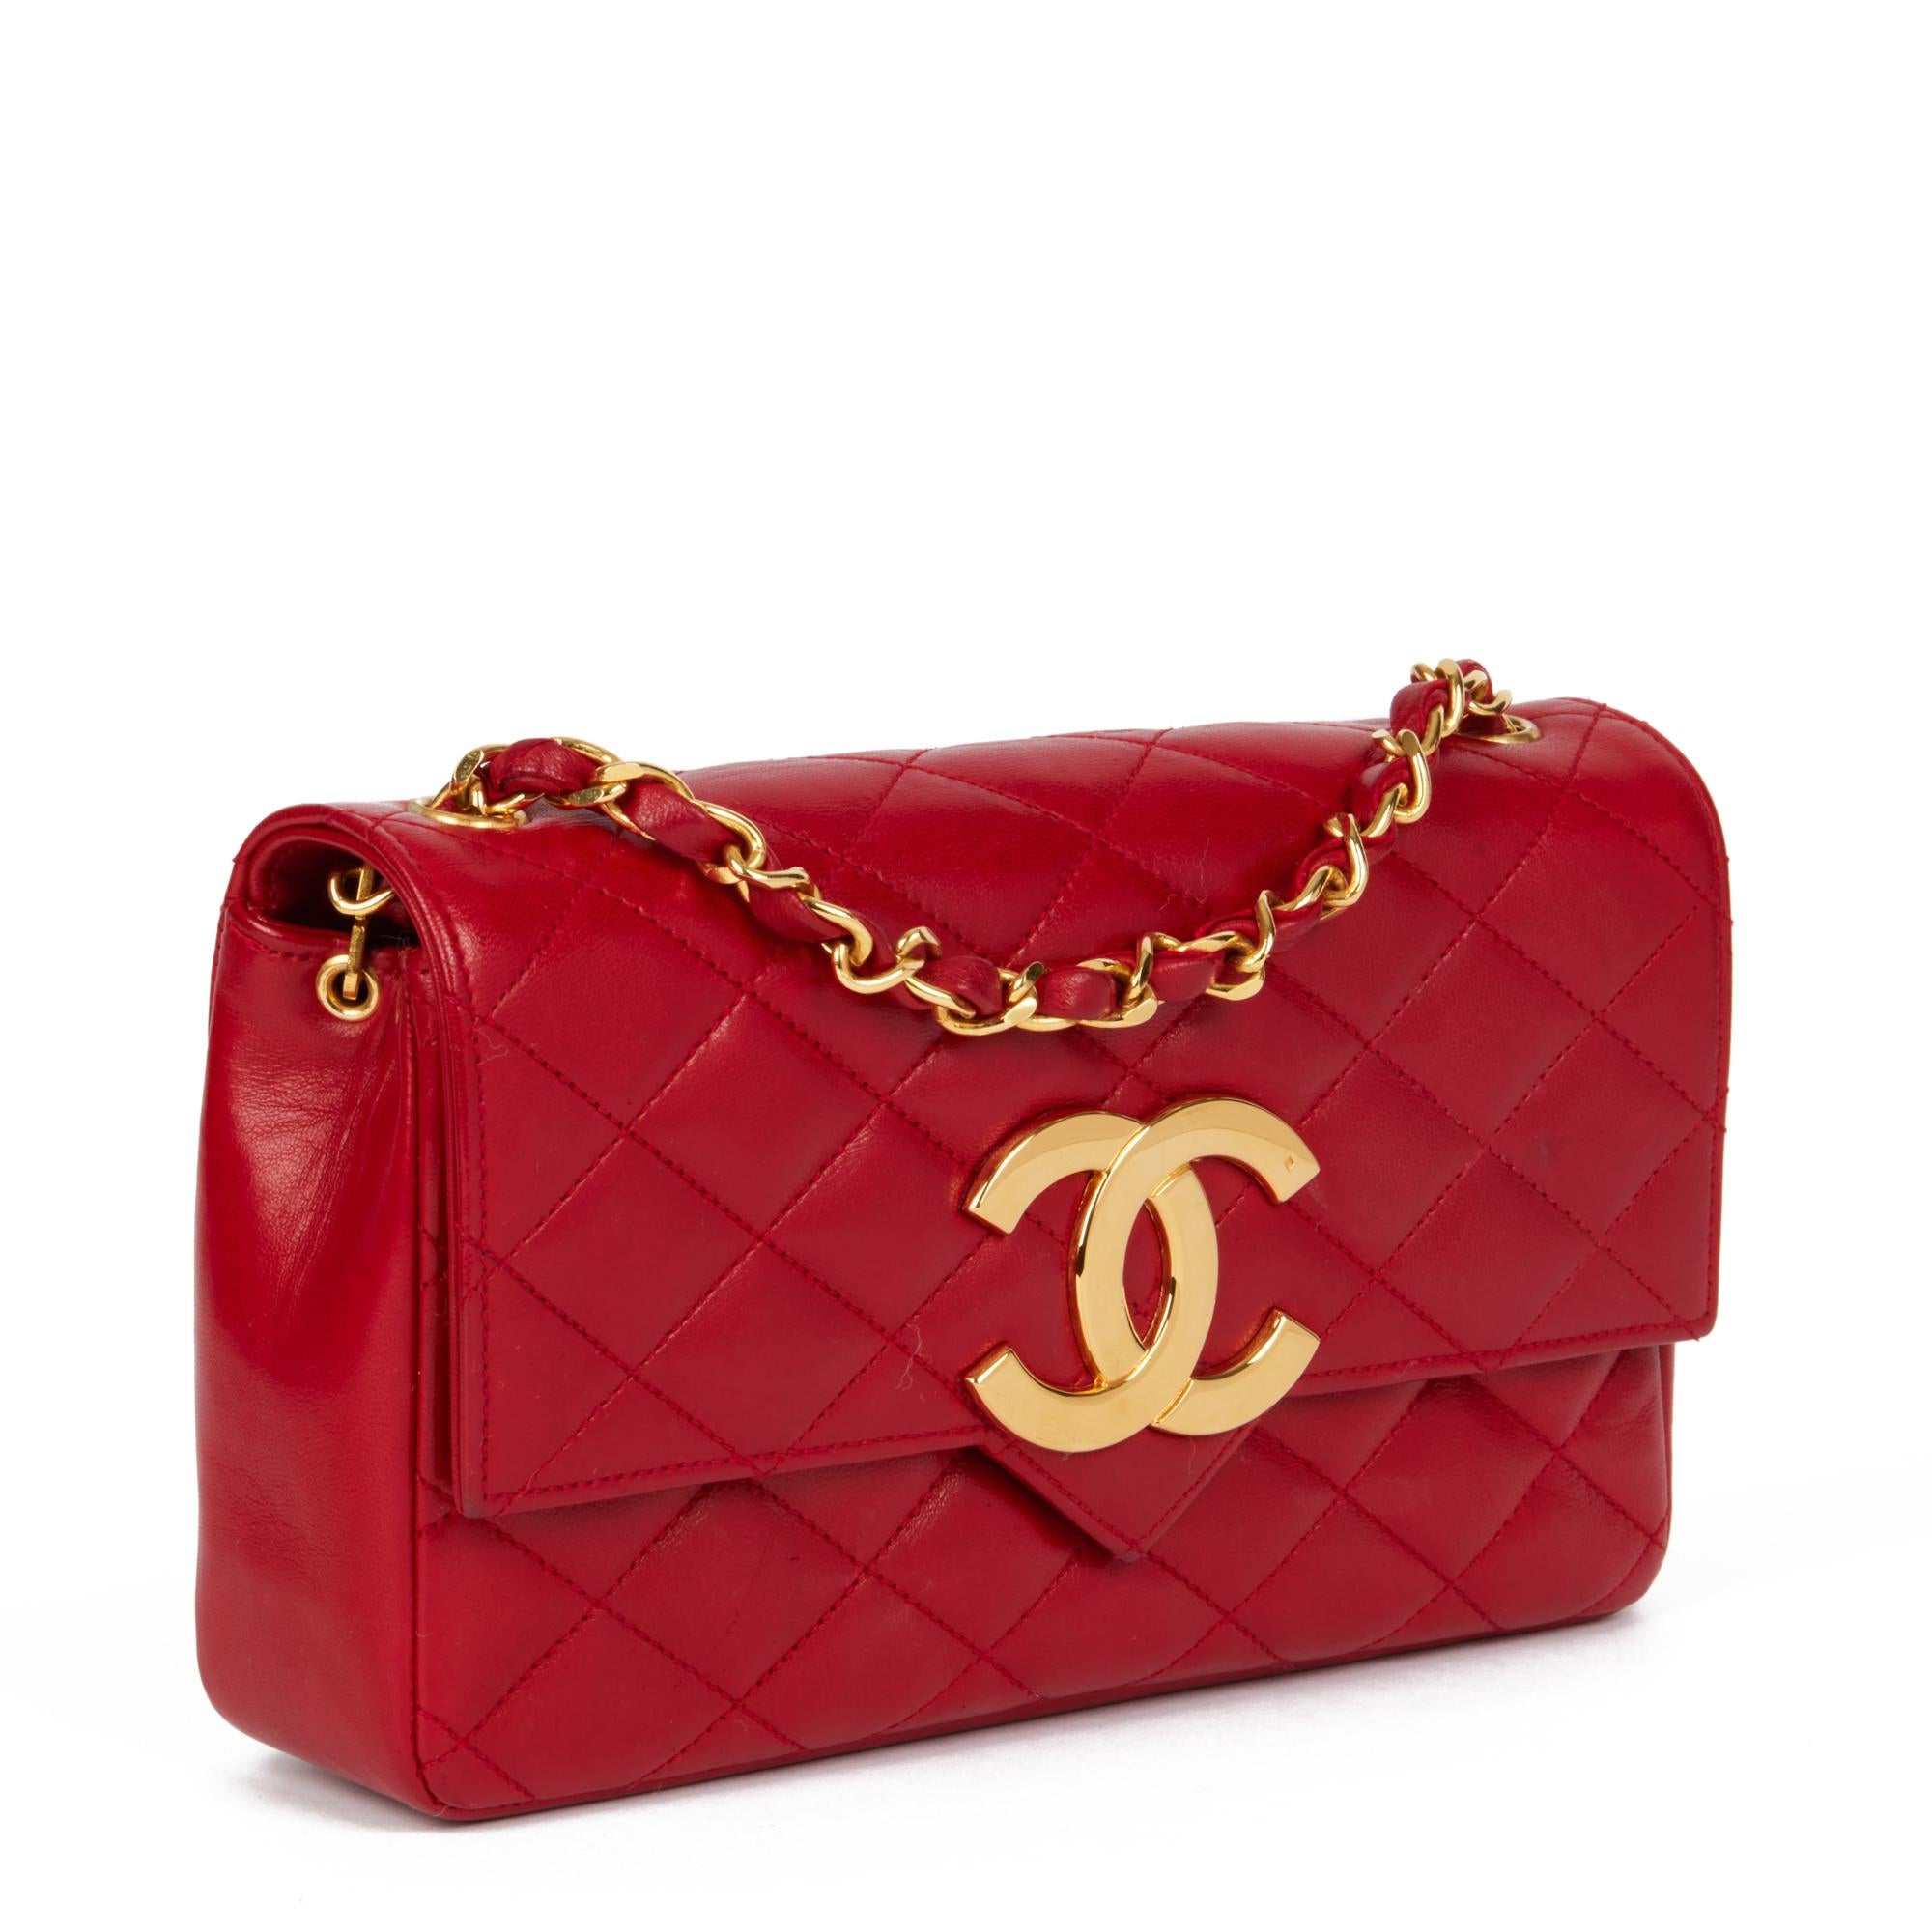 CHANEL
Red Quilted Lambskin Vintage XL Small Classic Single Flap Bag

Serial Number: 0609122
Age (Circa): 1988
Accompanied By: Chanel Dust Bag, Box, Authenticity Card
Authenticity Details: Authenticity Card, Serial Sticker (Made in France)
Gender: